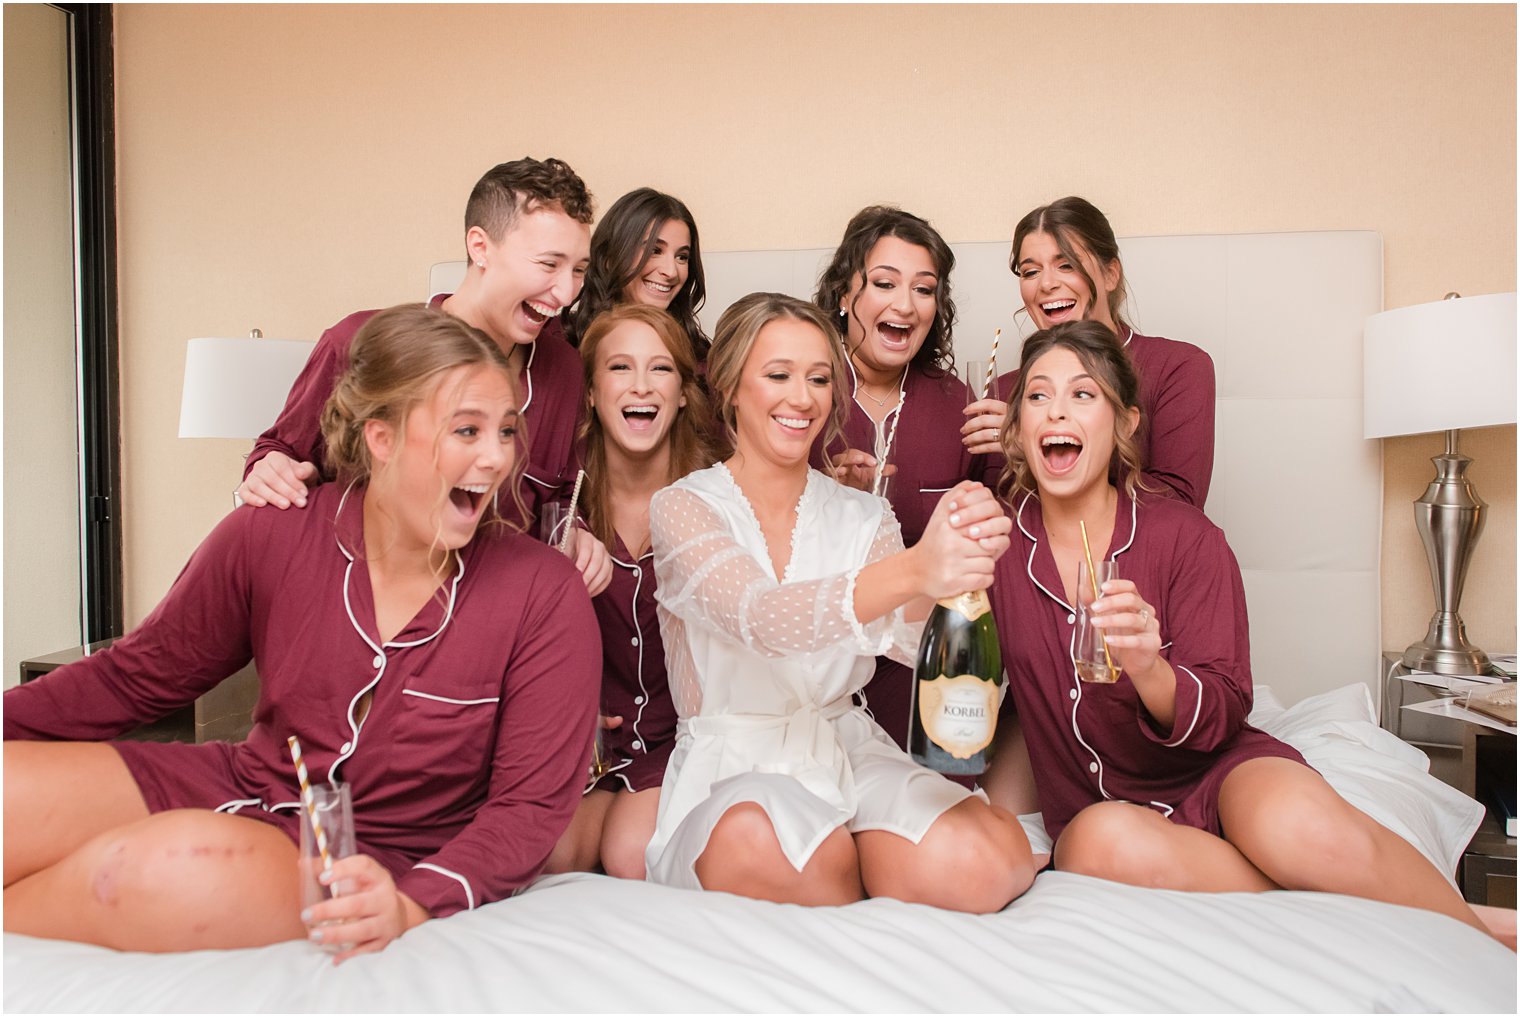 Bridesmaids opening a bottle of champagne